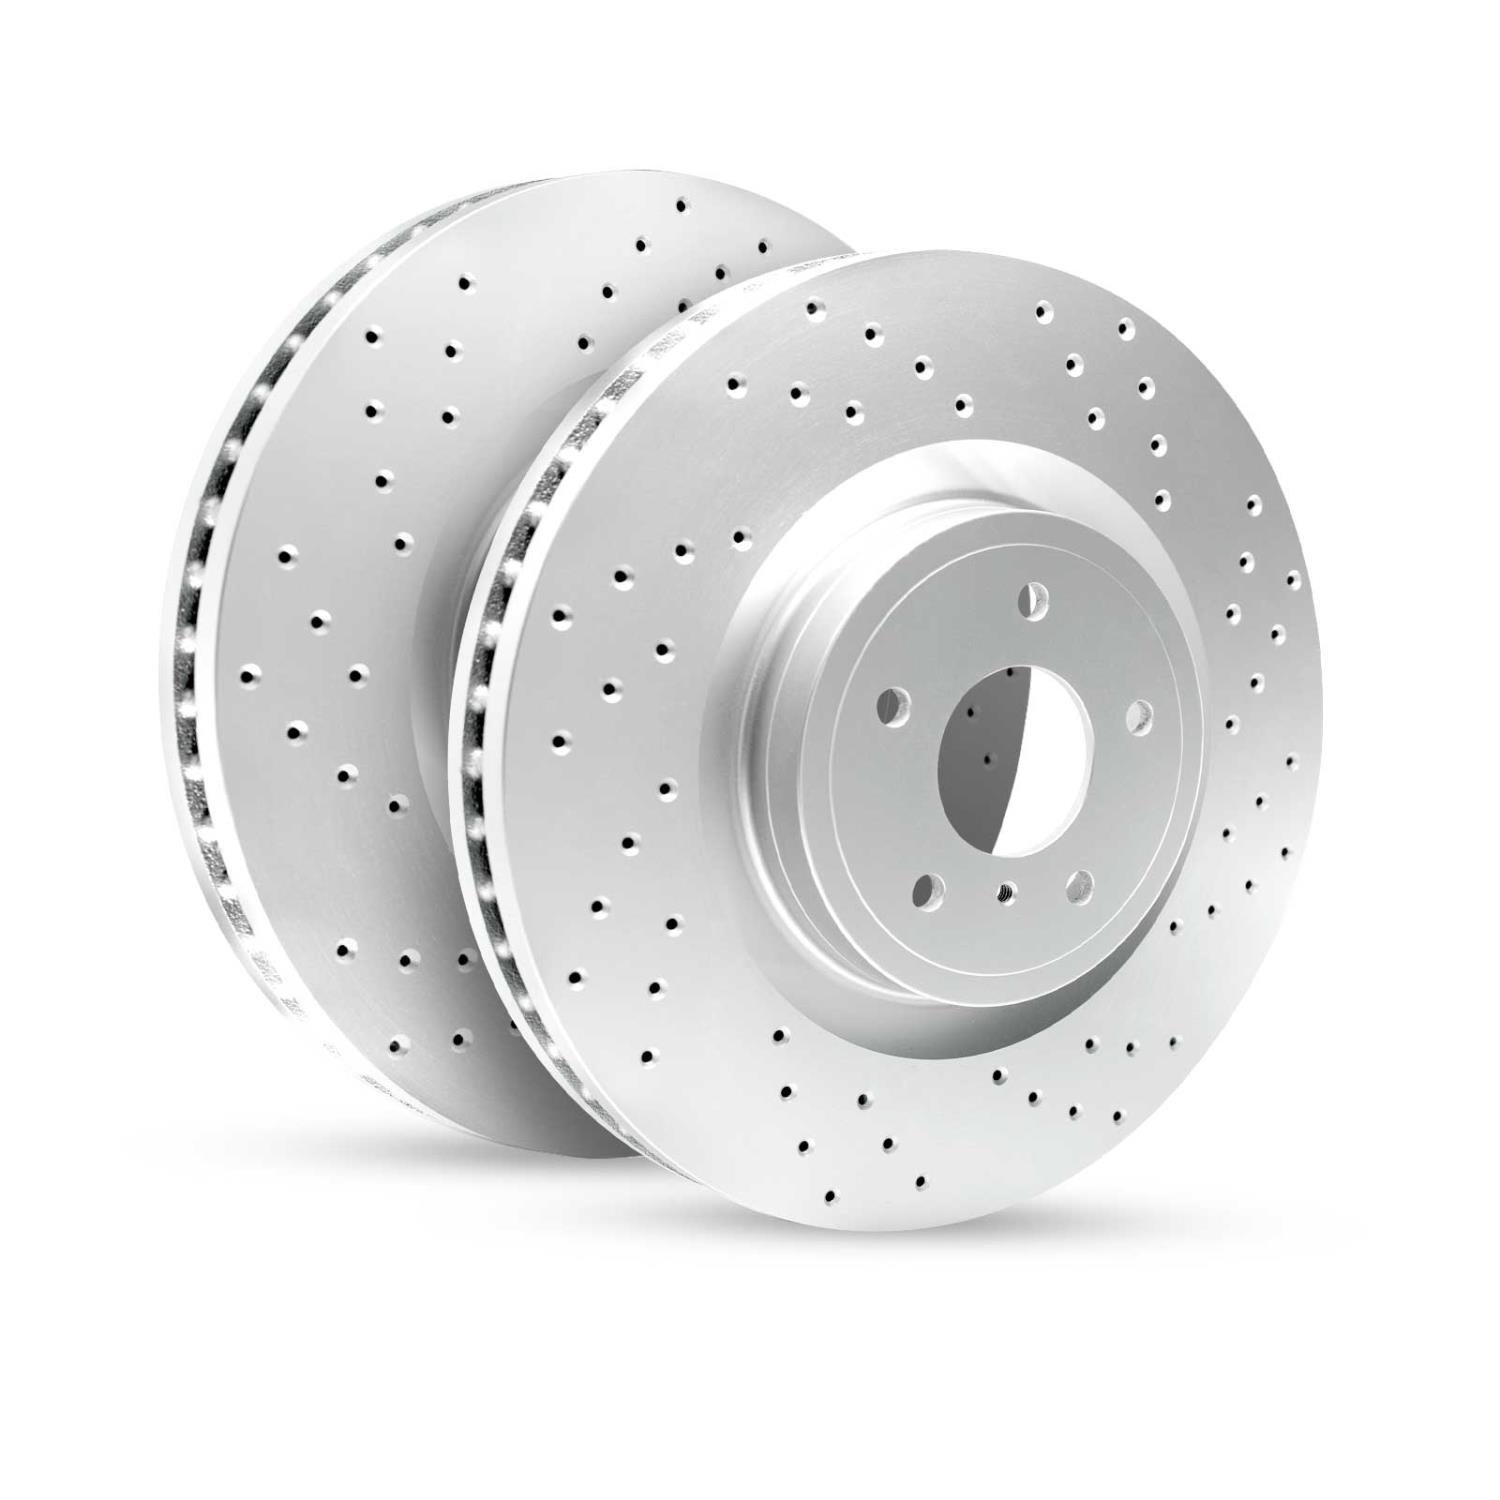 GEO-Carbon Drilled/Slotted Rotors, 2002-2018 Fits Multiple